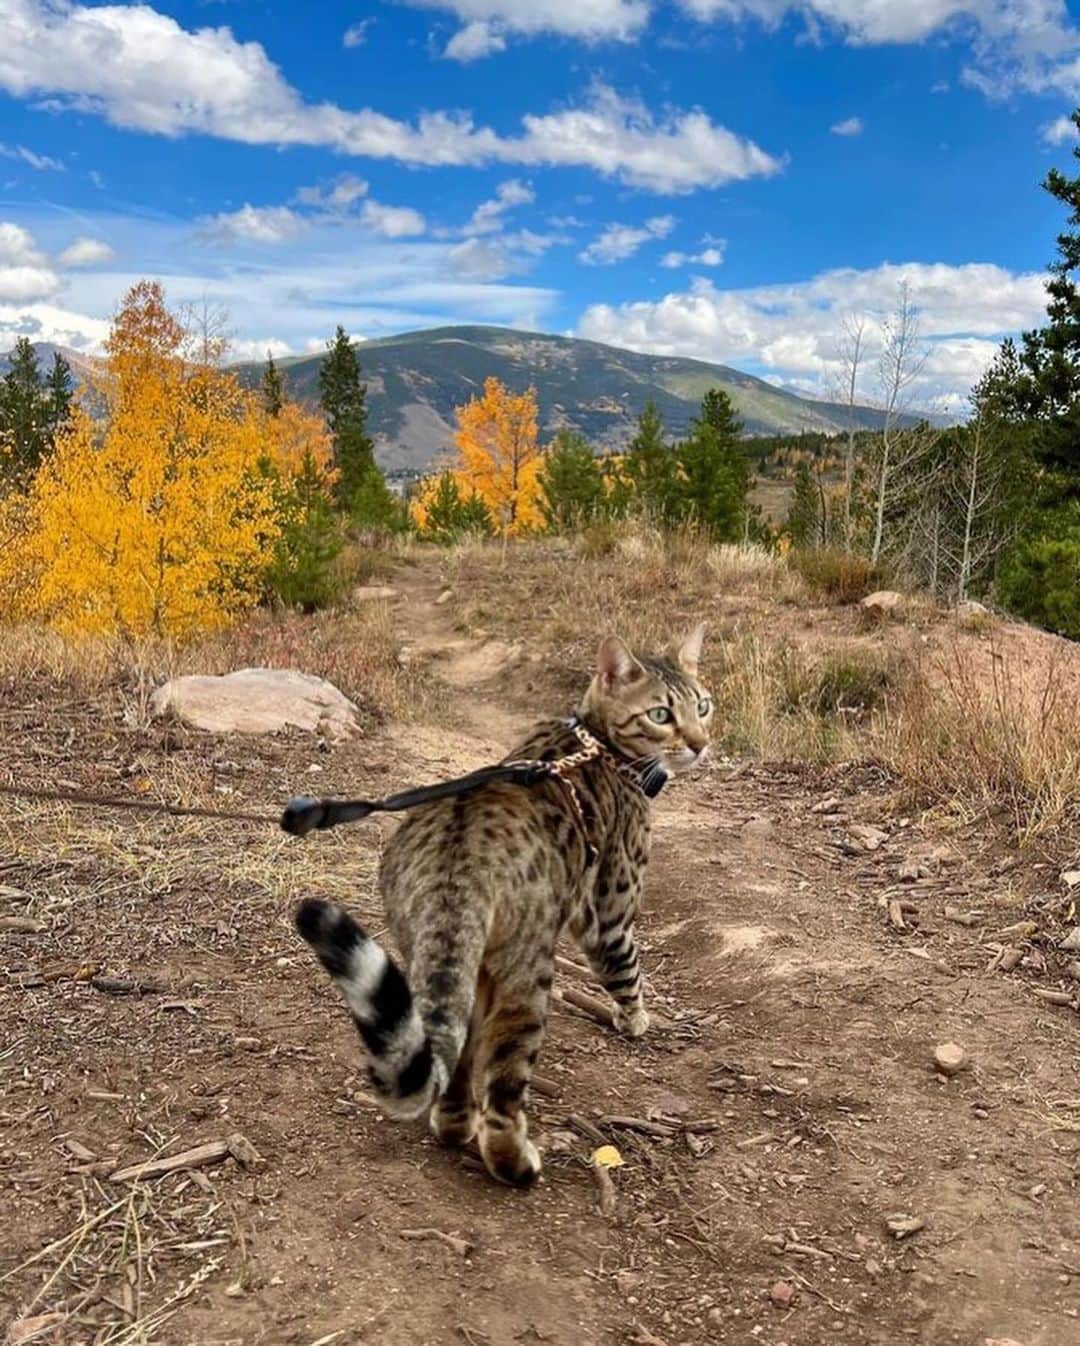 Bolt and Keelのインスタグラム：「Meet Mandu!🐆 This pretty kitty loves taking walks in the mountains ⛰️🐱  @adventrapets ➡️ @manduthebengalcat  —————————————————— Follow @adventrapets to meet cute, brave and inspiring adventure pets from all over the world! 🌲🐶🐱🌲  • TAG US IN YOUR POSTS to get your little adventurer featured! #adventrapets ——————————————————」